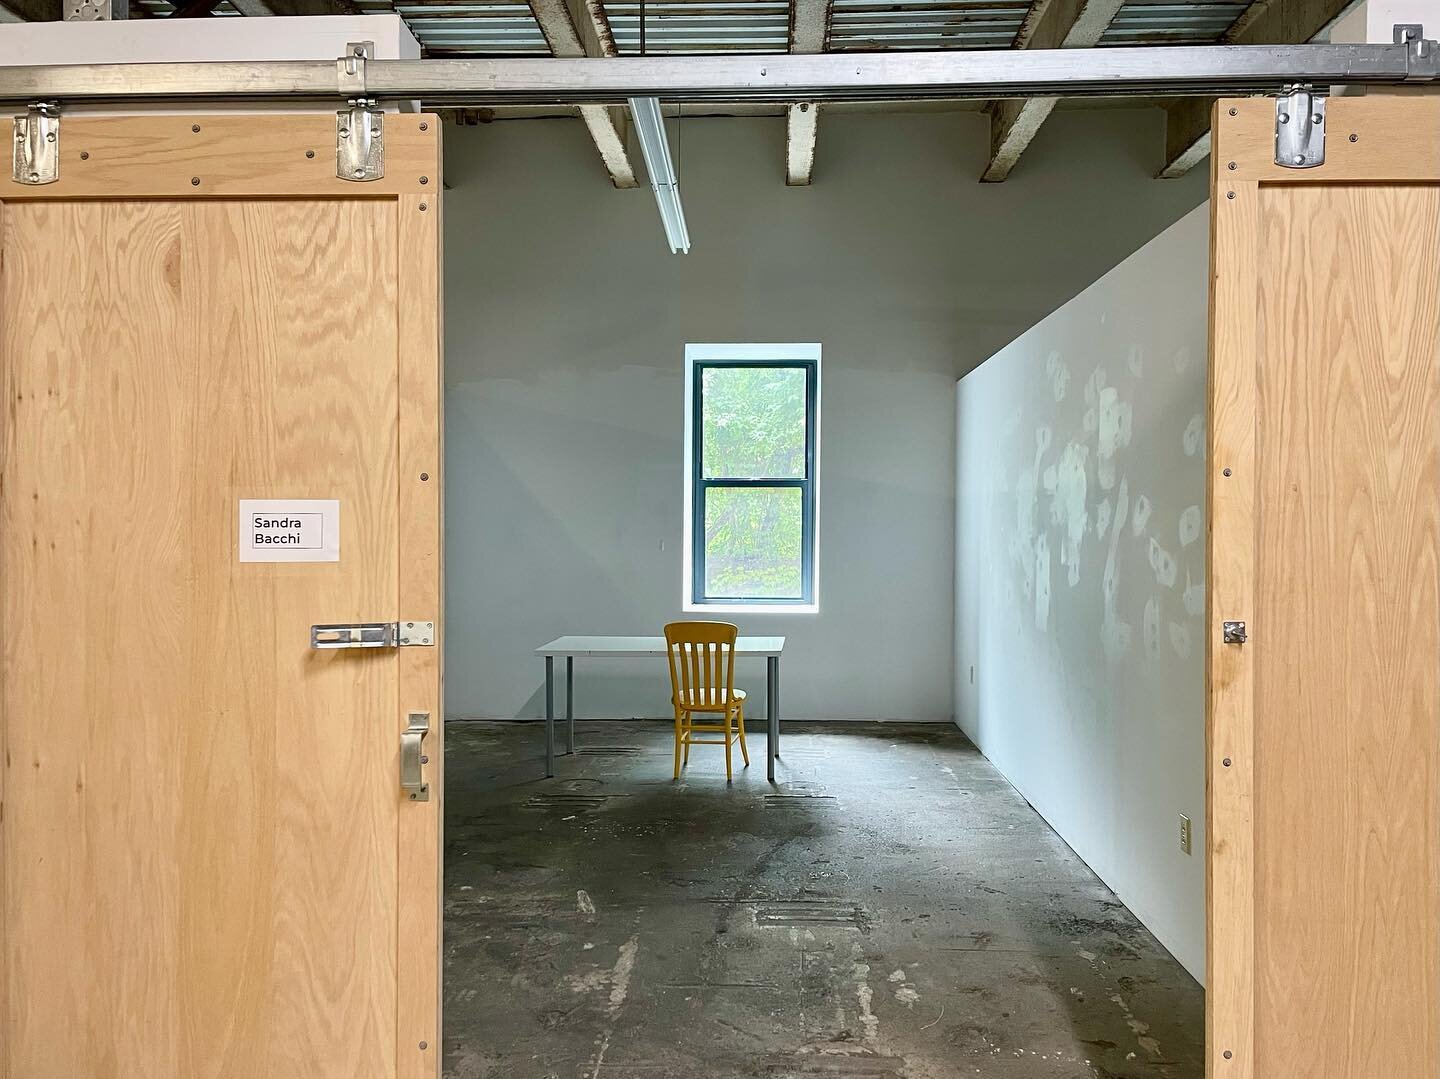 Moving day @brewhouseassociation for the #distilleryartistresidency 
This is my new studio where I&rsquo;ll be working along side with 6 other artists (each with their own space) for the next year. 
I&rsquo;m so excited! 

#artistinresidence #artisti